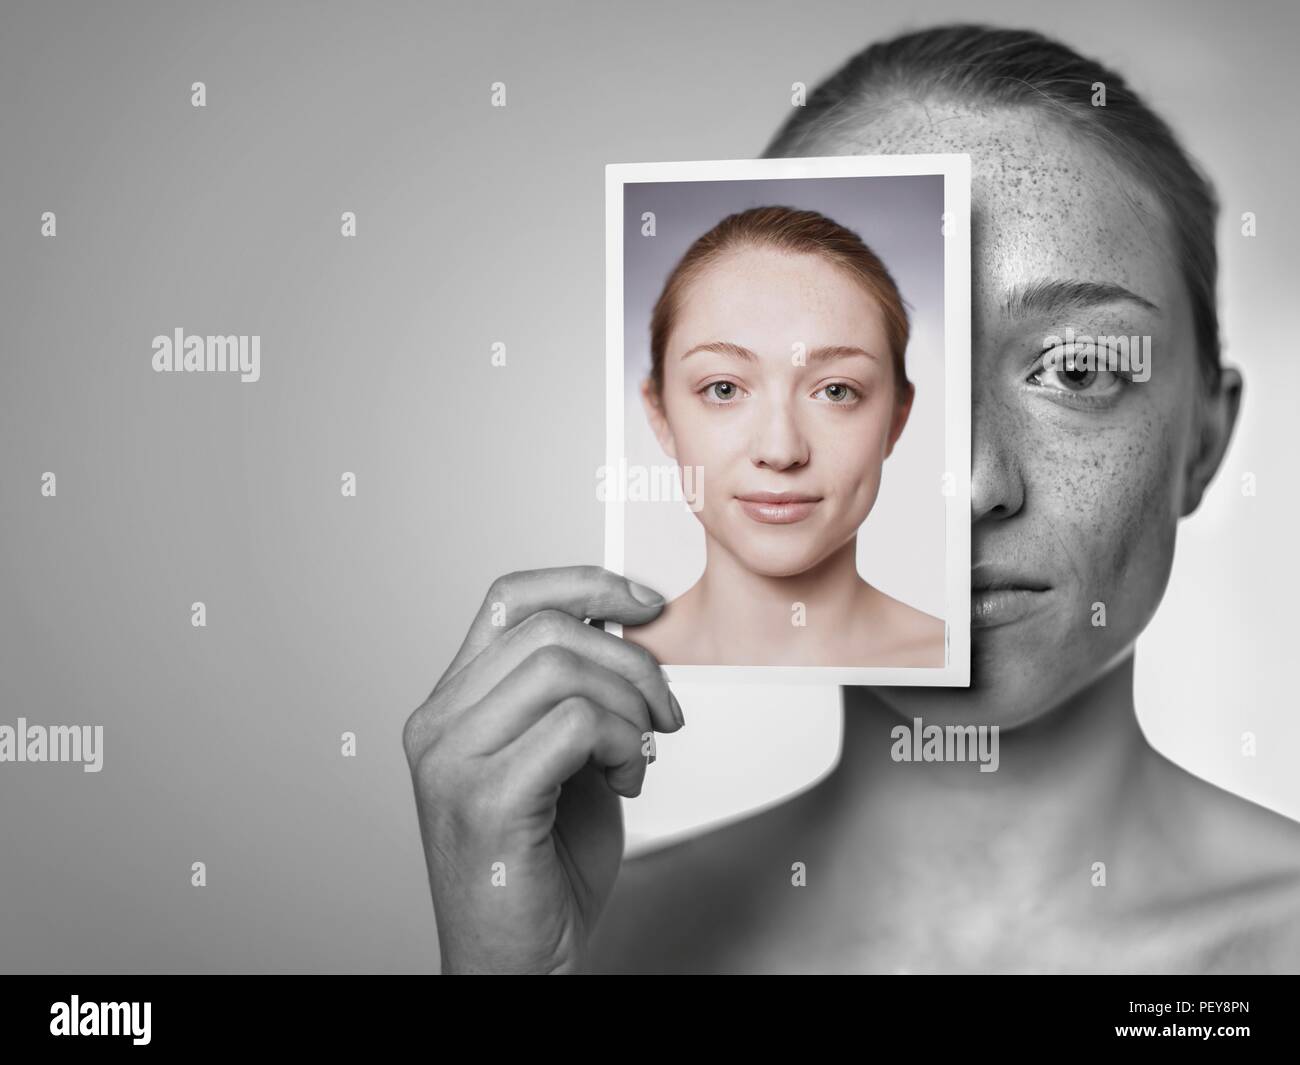 Sun damage. Woman showing the damage sun exposure has done to her skin. Stock Photo